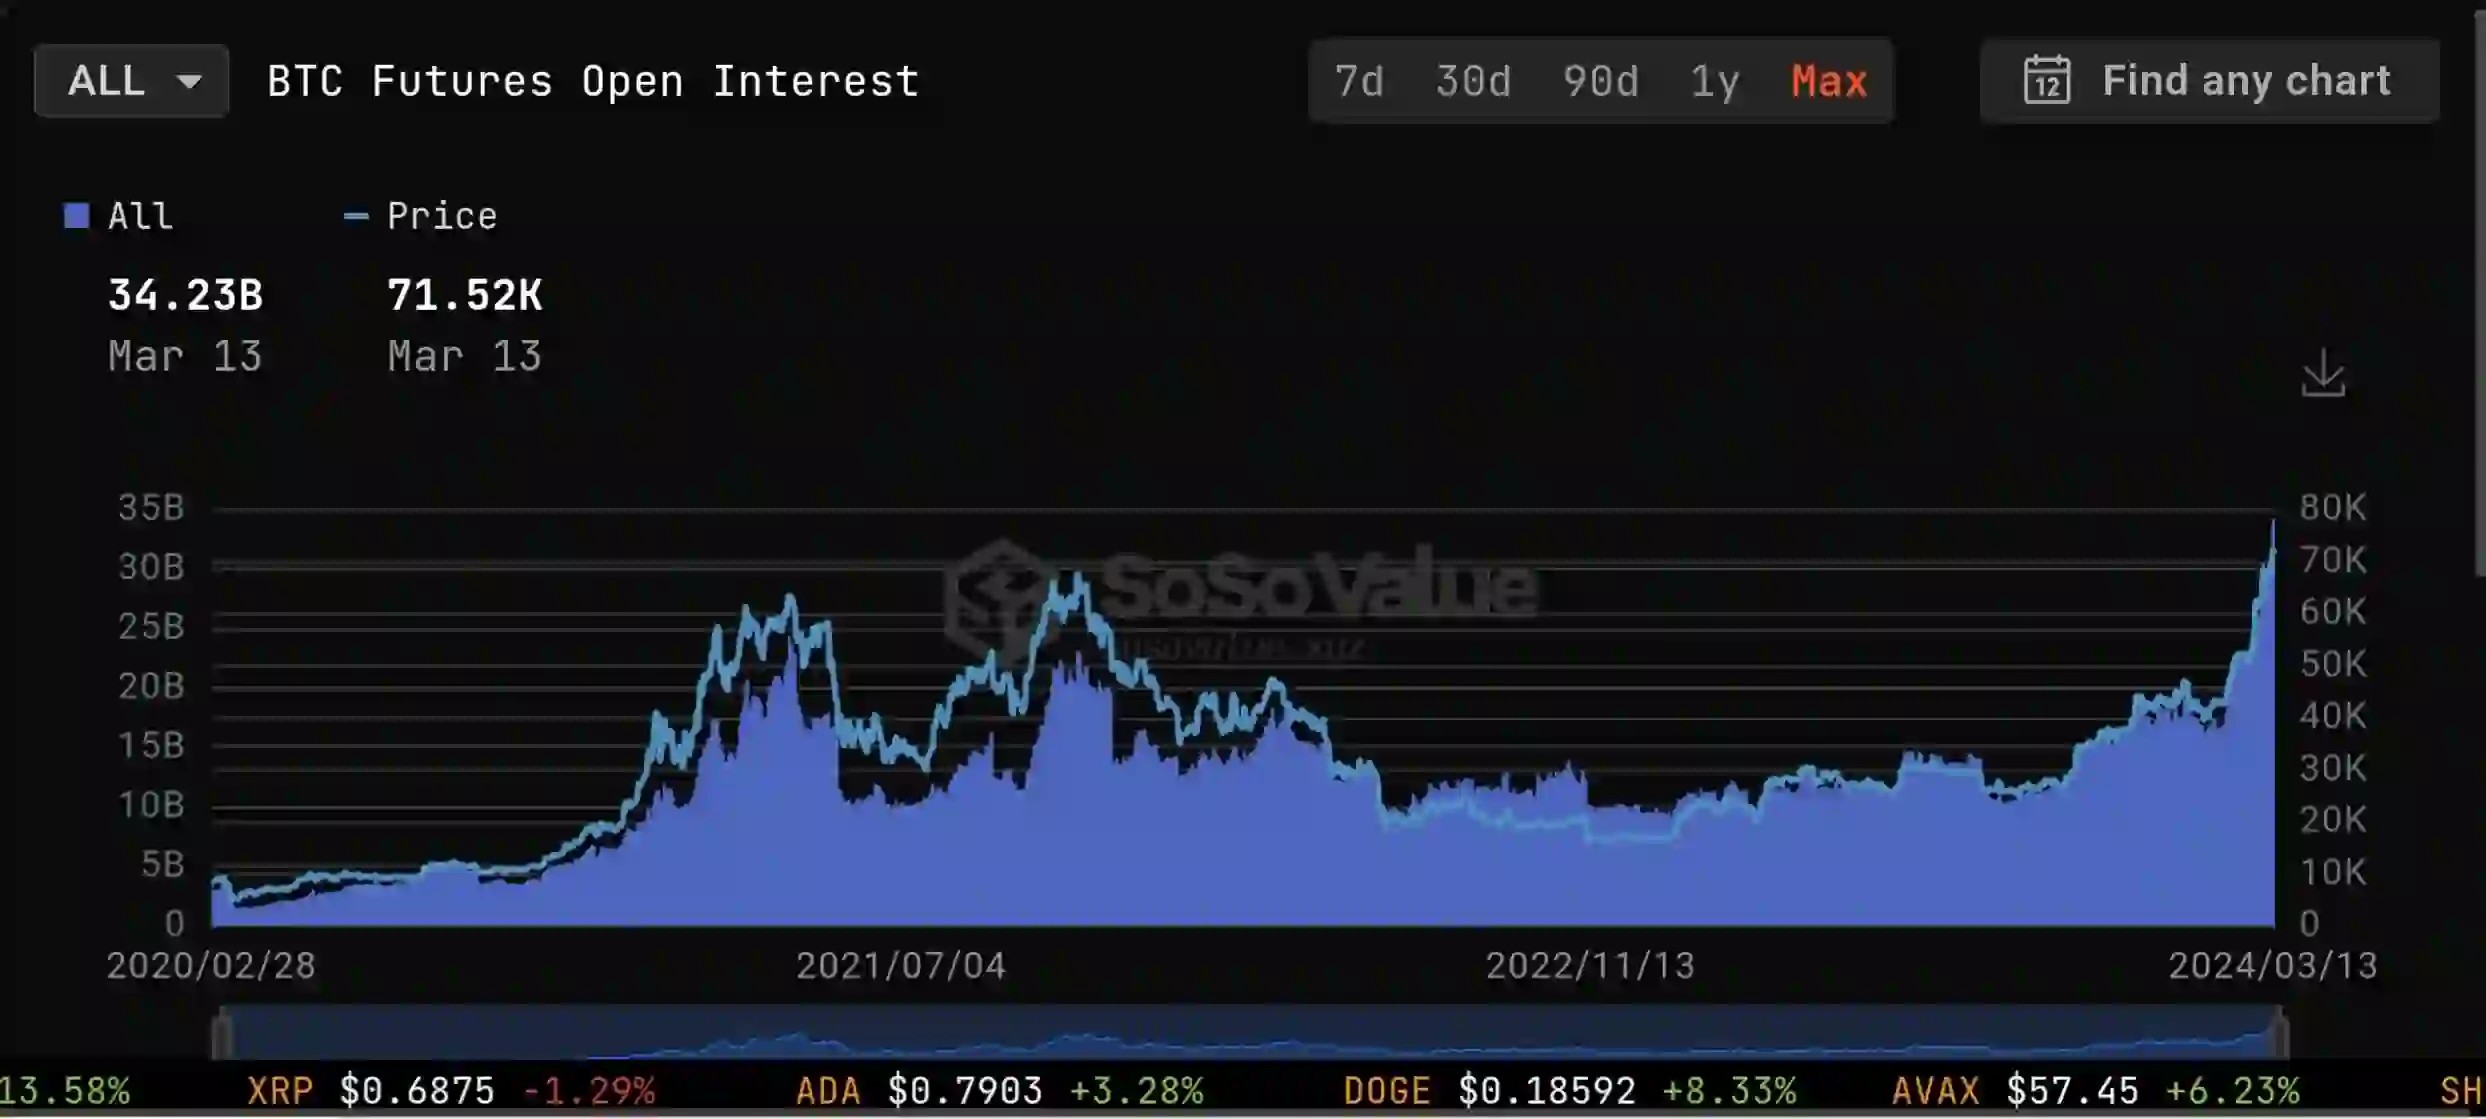 BTC Futures Open Interest from SoSoValue